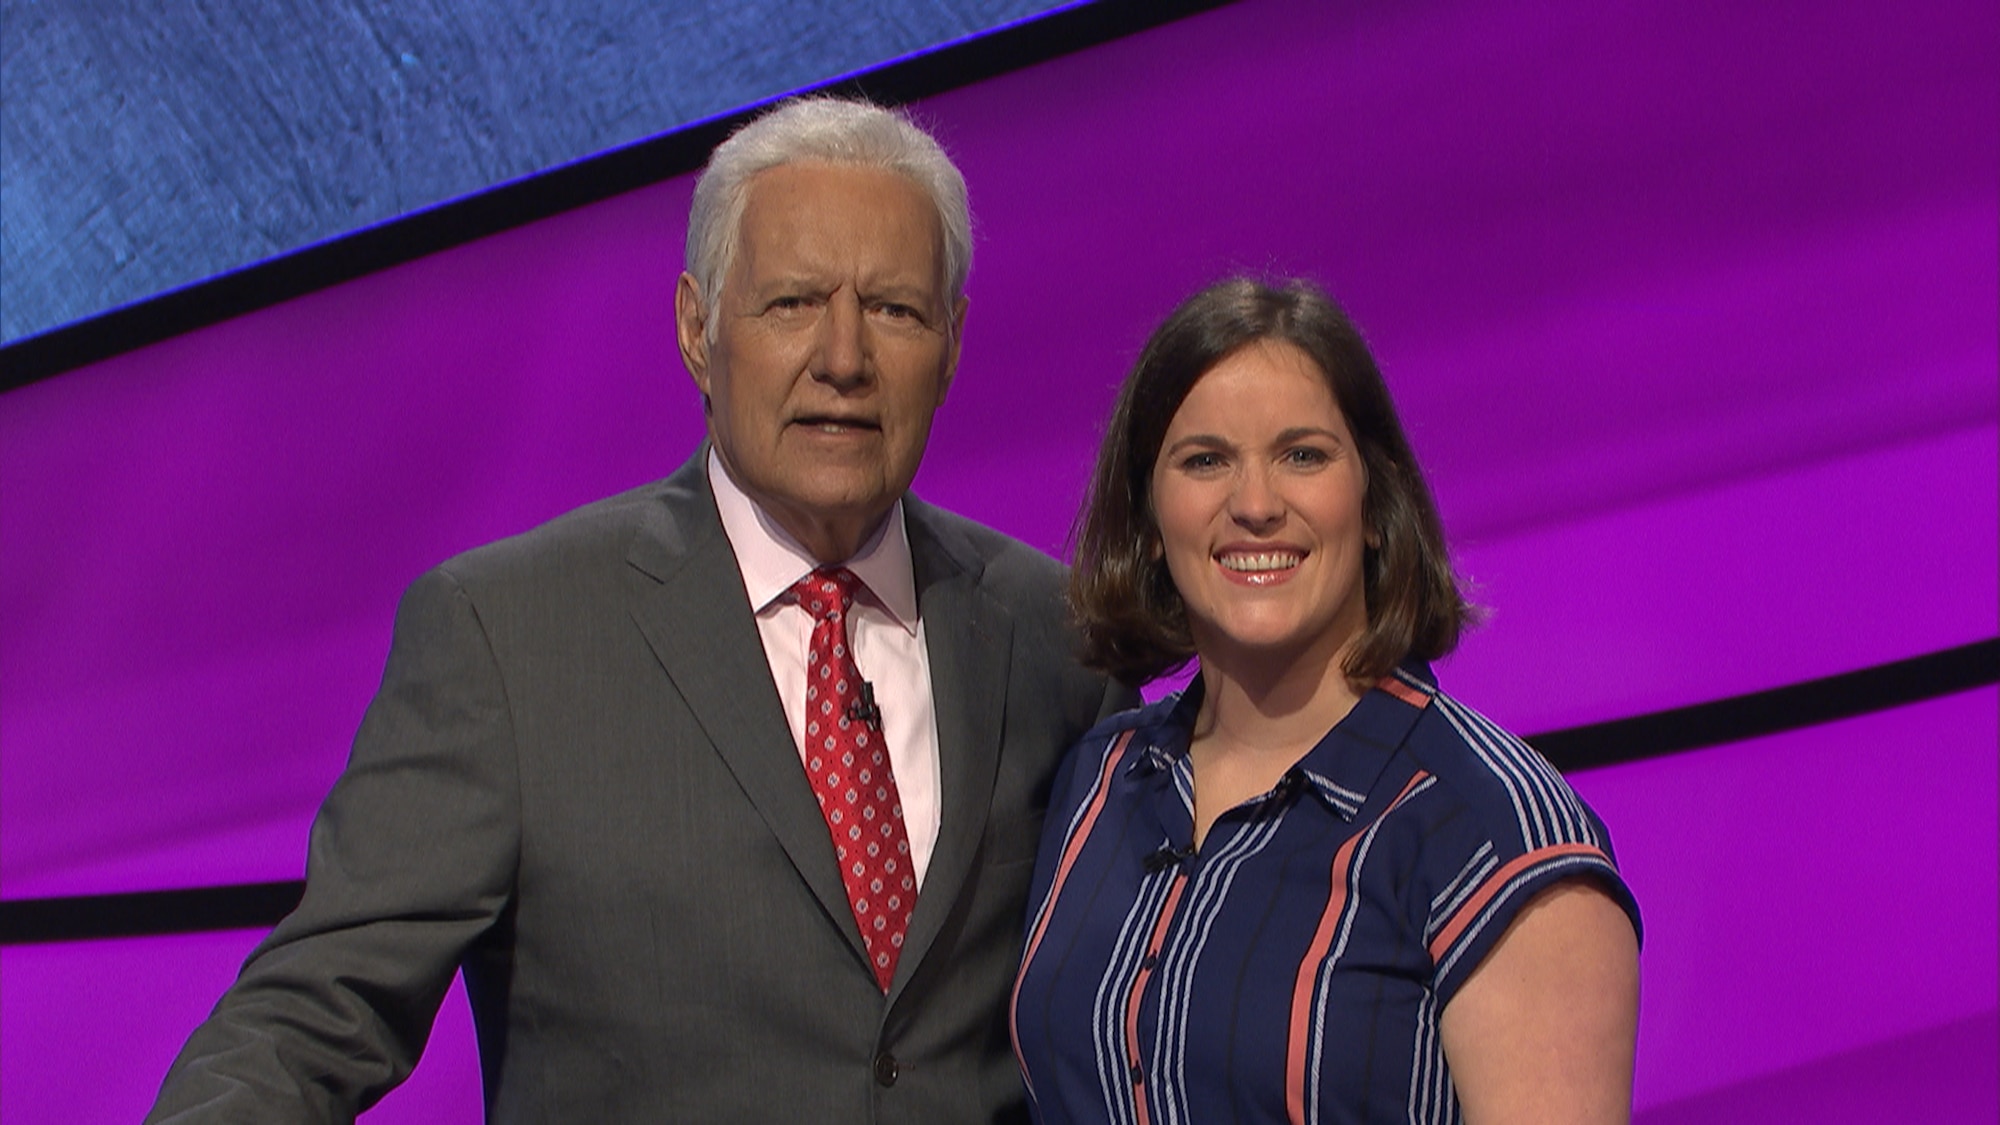 Mrs. Danyelle Long-Hyland, lab instructor assigned to United States Army Medical Research Institute of Infectious Disease, poses with Jeopardy host Alex Trebek. (courtesy photo)